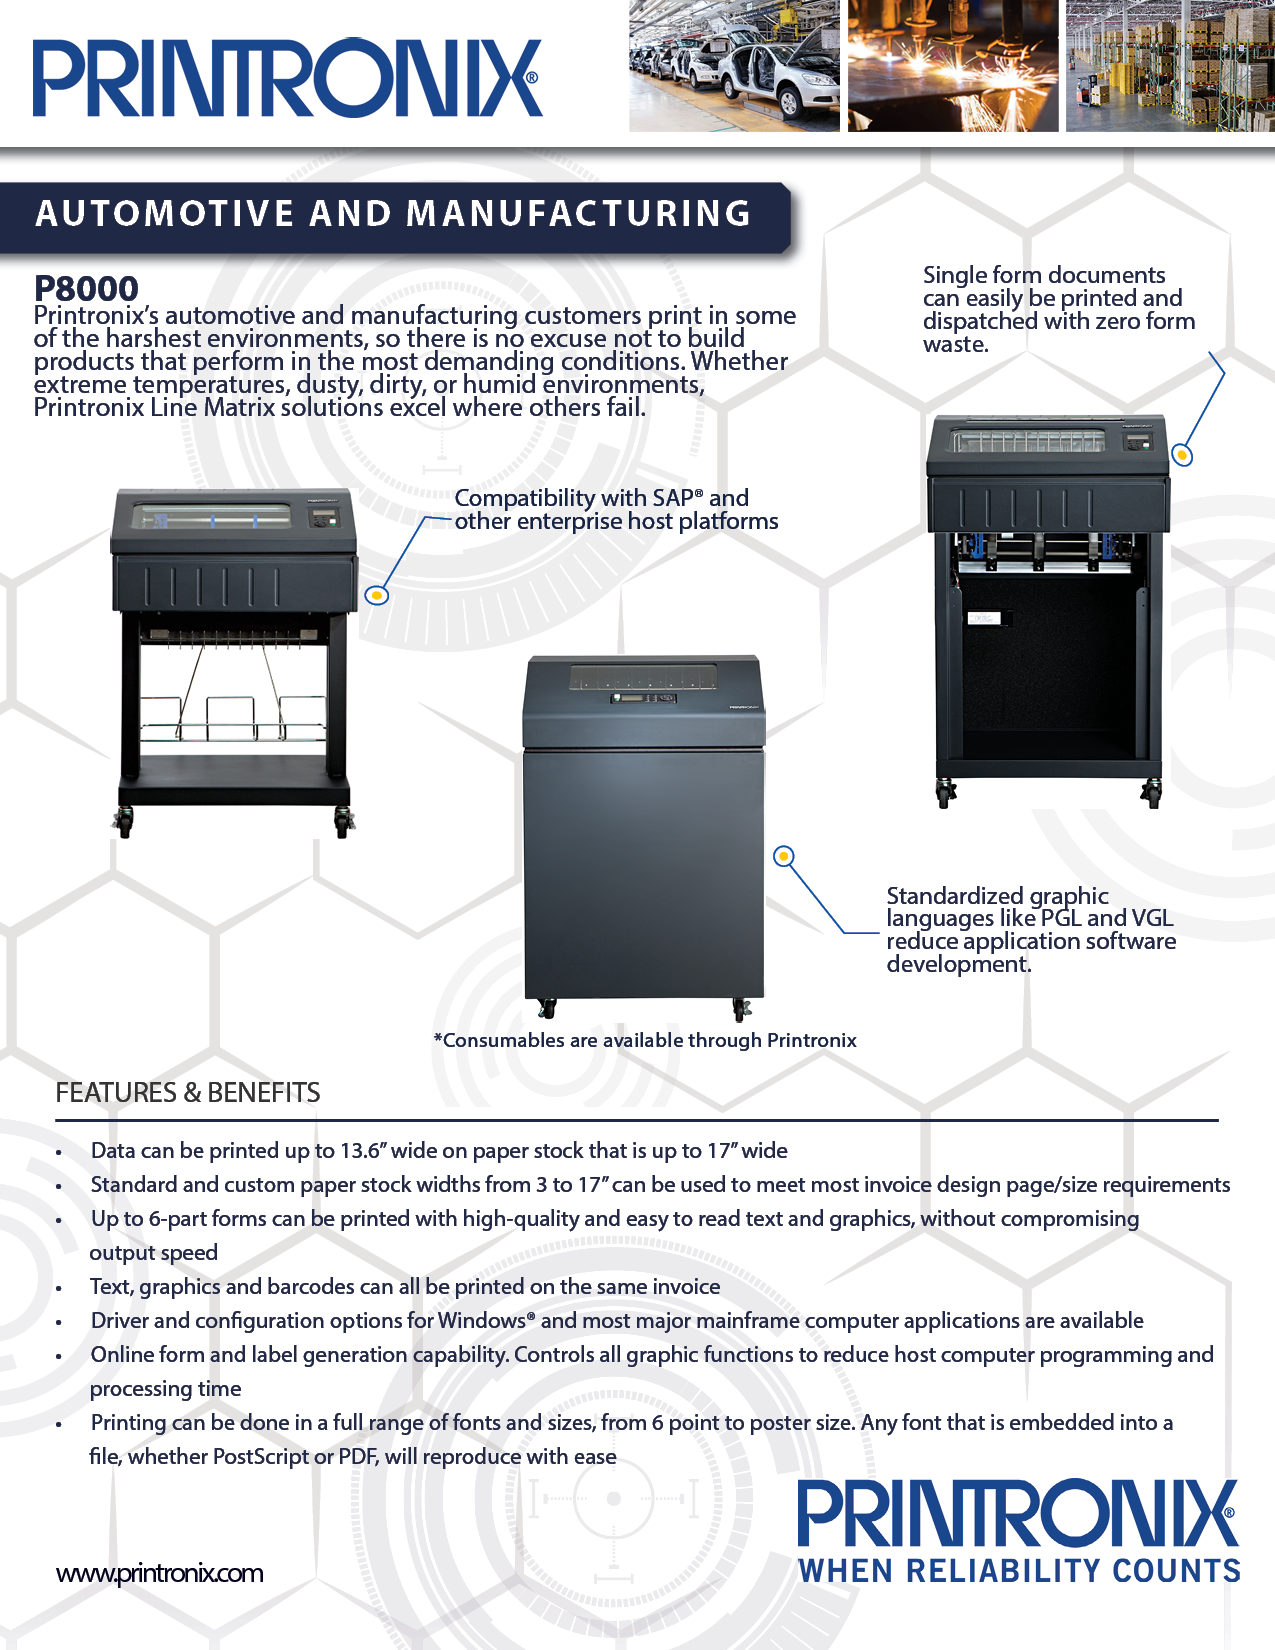 Featured image for “The Advantages of Line Matrix Printing In Automotive and Manufacturing”